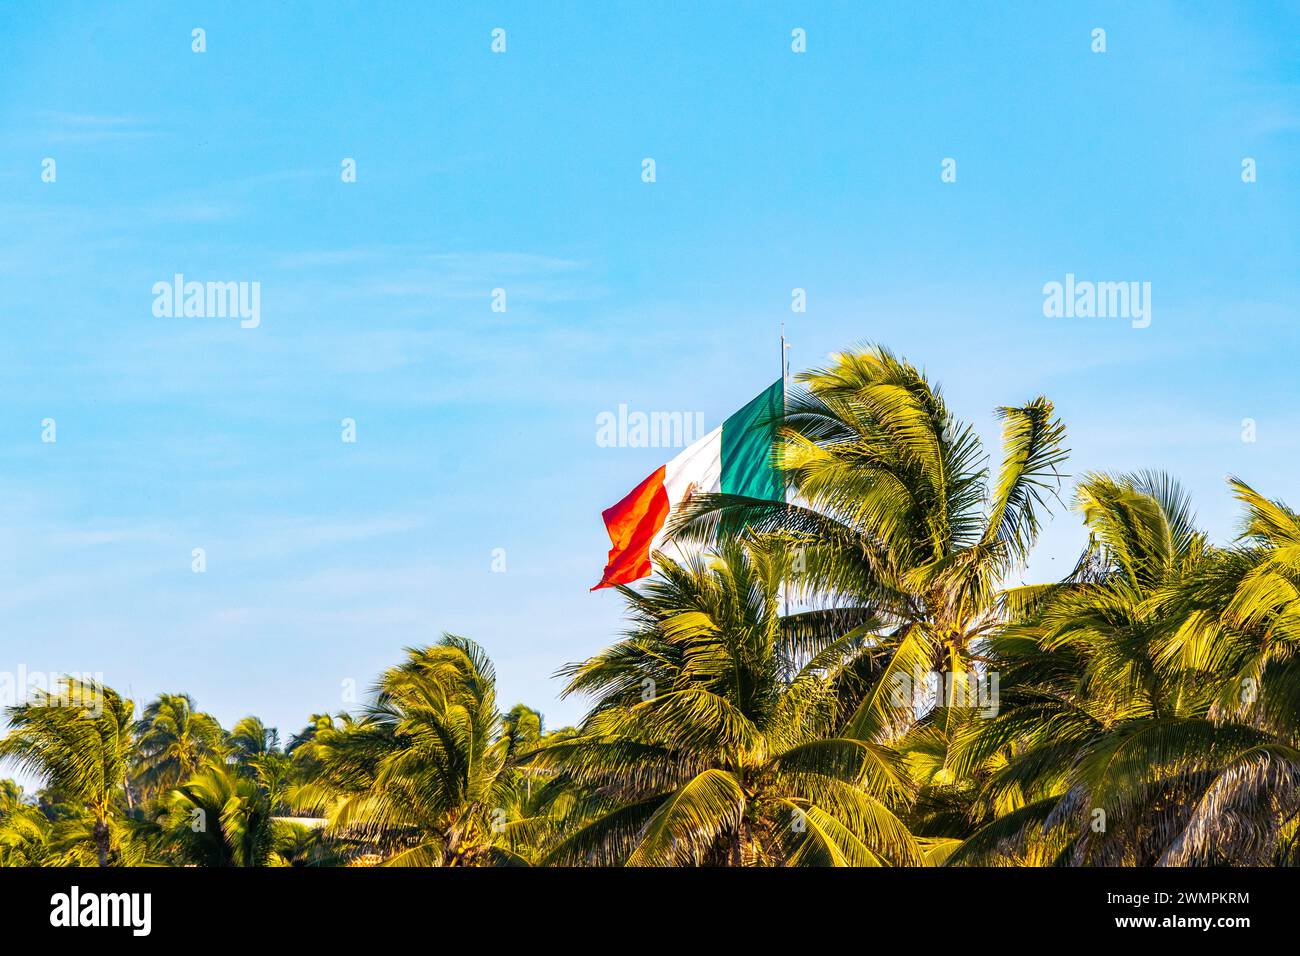 Mexican Green White Red Flag With Palm Trees And Blue Sky And Clouds In Zicatela Puerto Escondido Oaxaca Mexico. Stock Photo